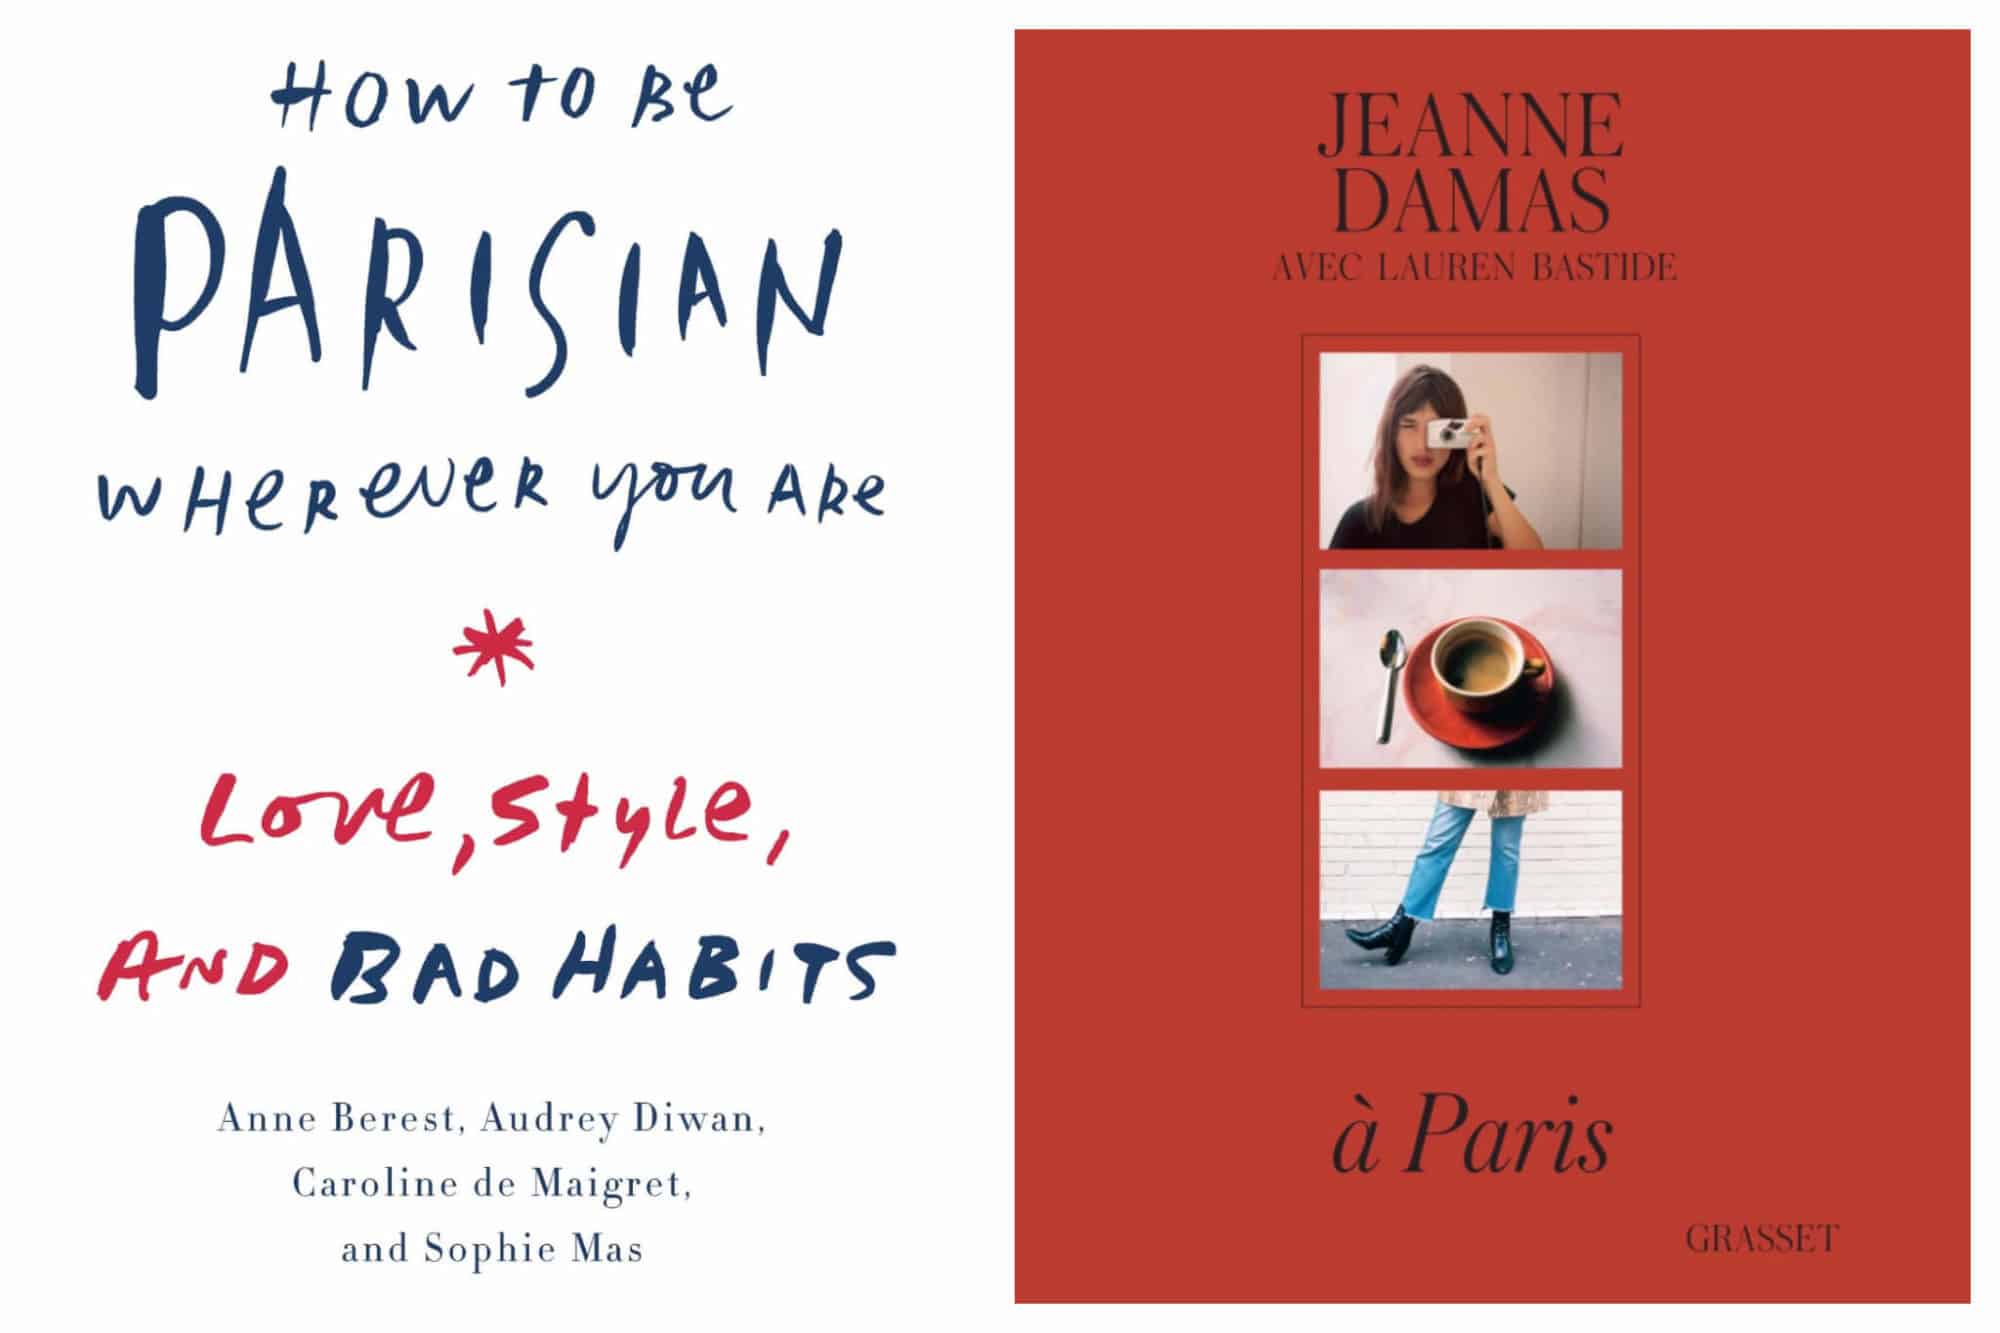 Left, the cover of the book 'How to be Parisian wherever you are'. Right, 'A Paris' book by Jeanne Damas, about Parisian style.